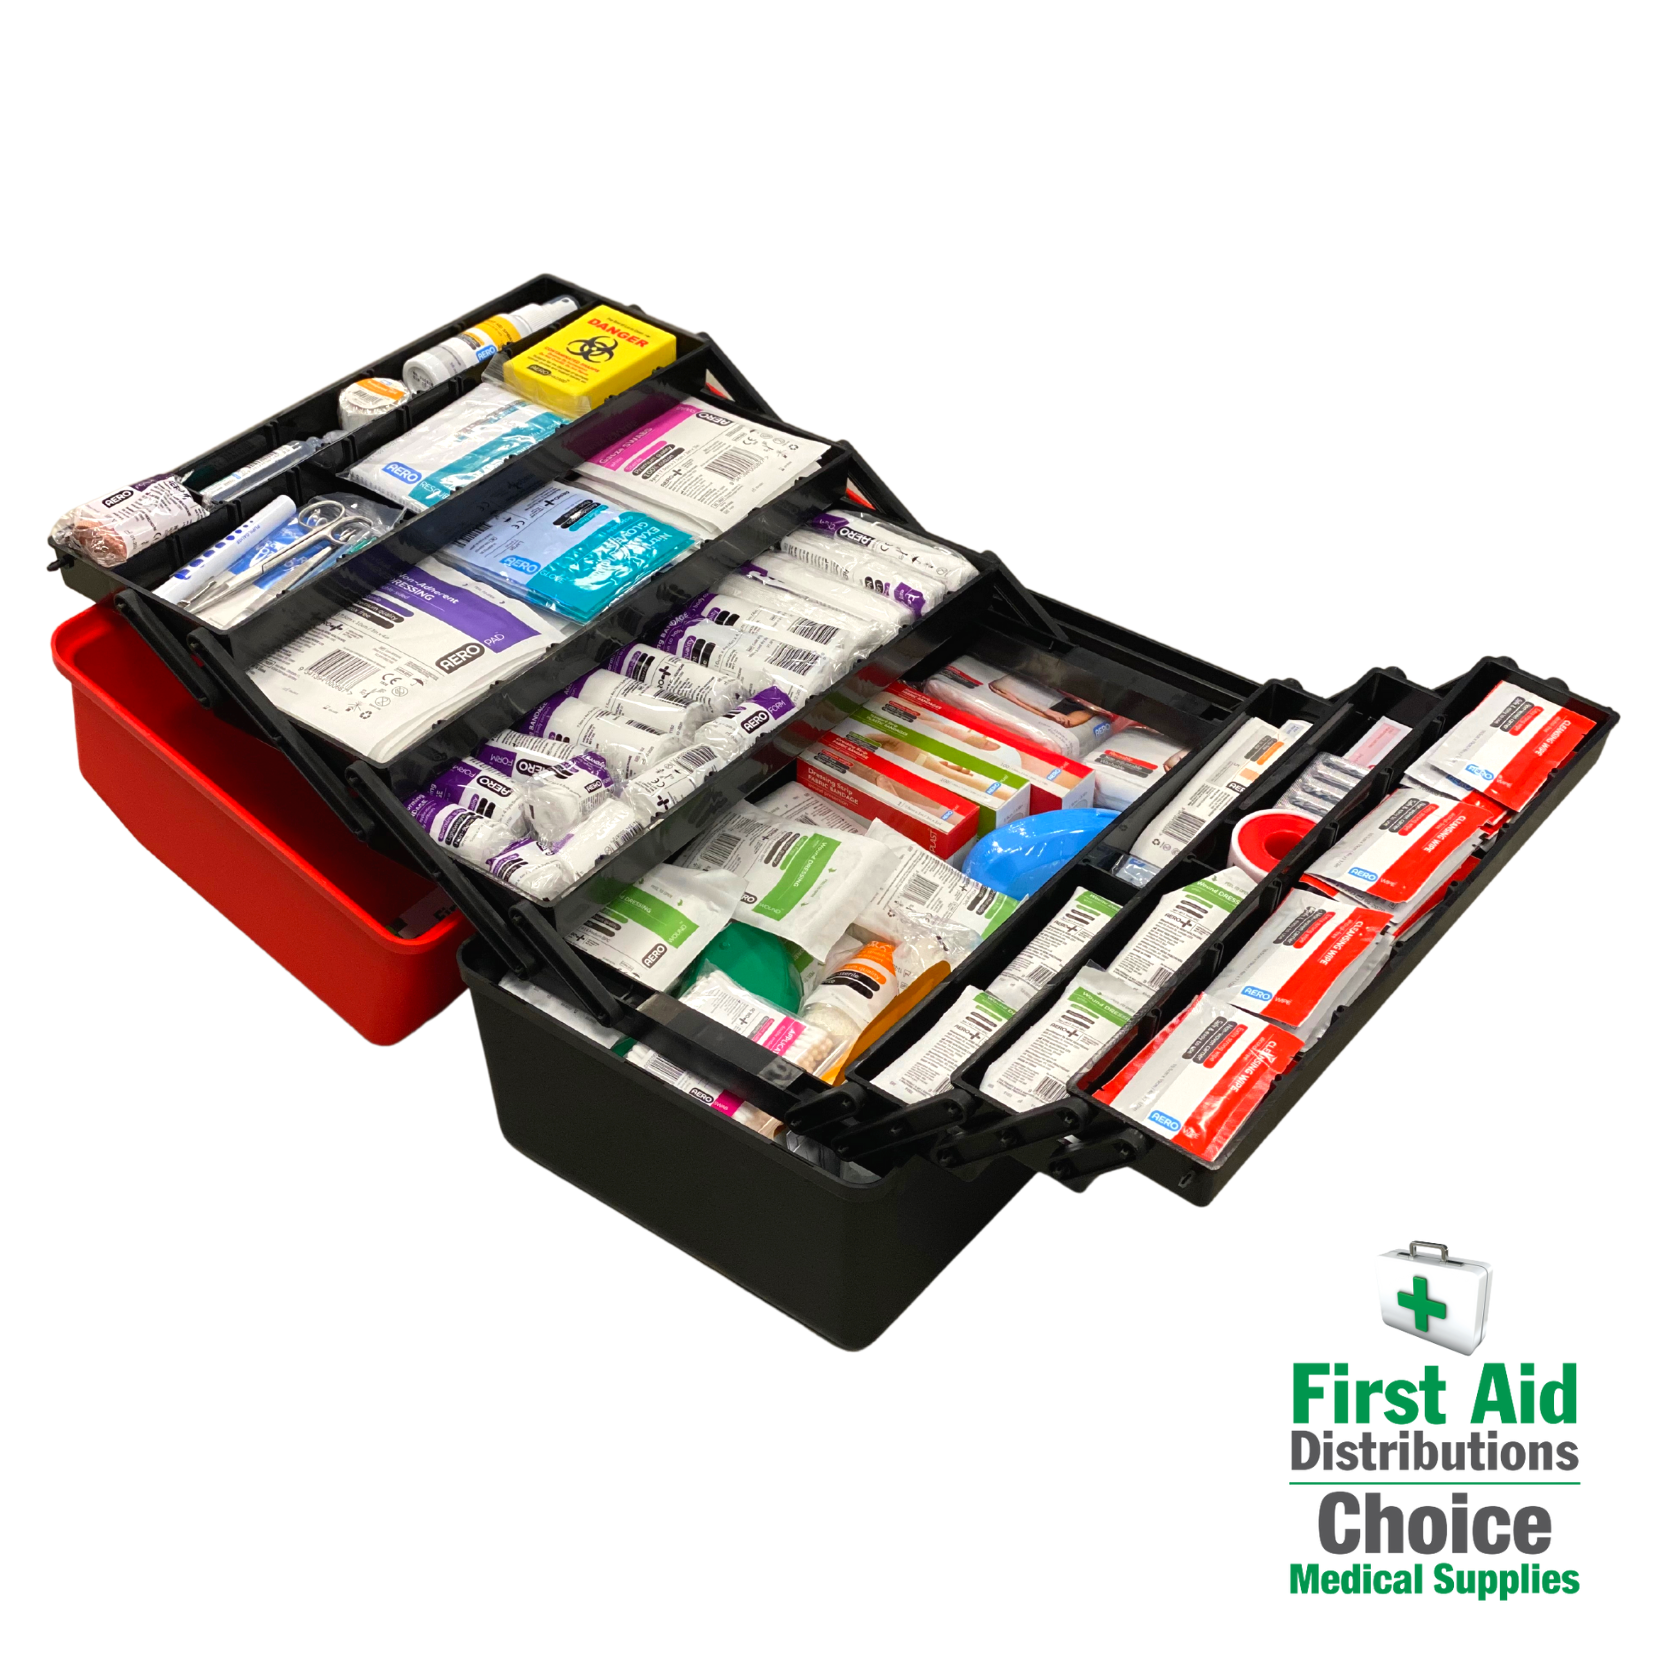 files/Model_20_Contents_Box_Side_First_Aid_Distributions.png